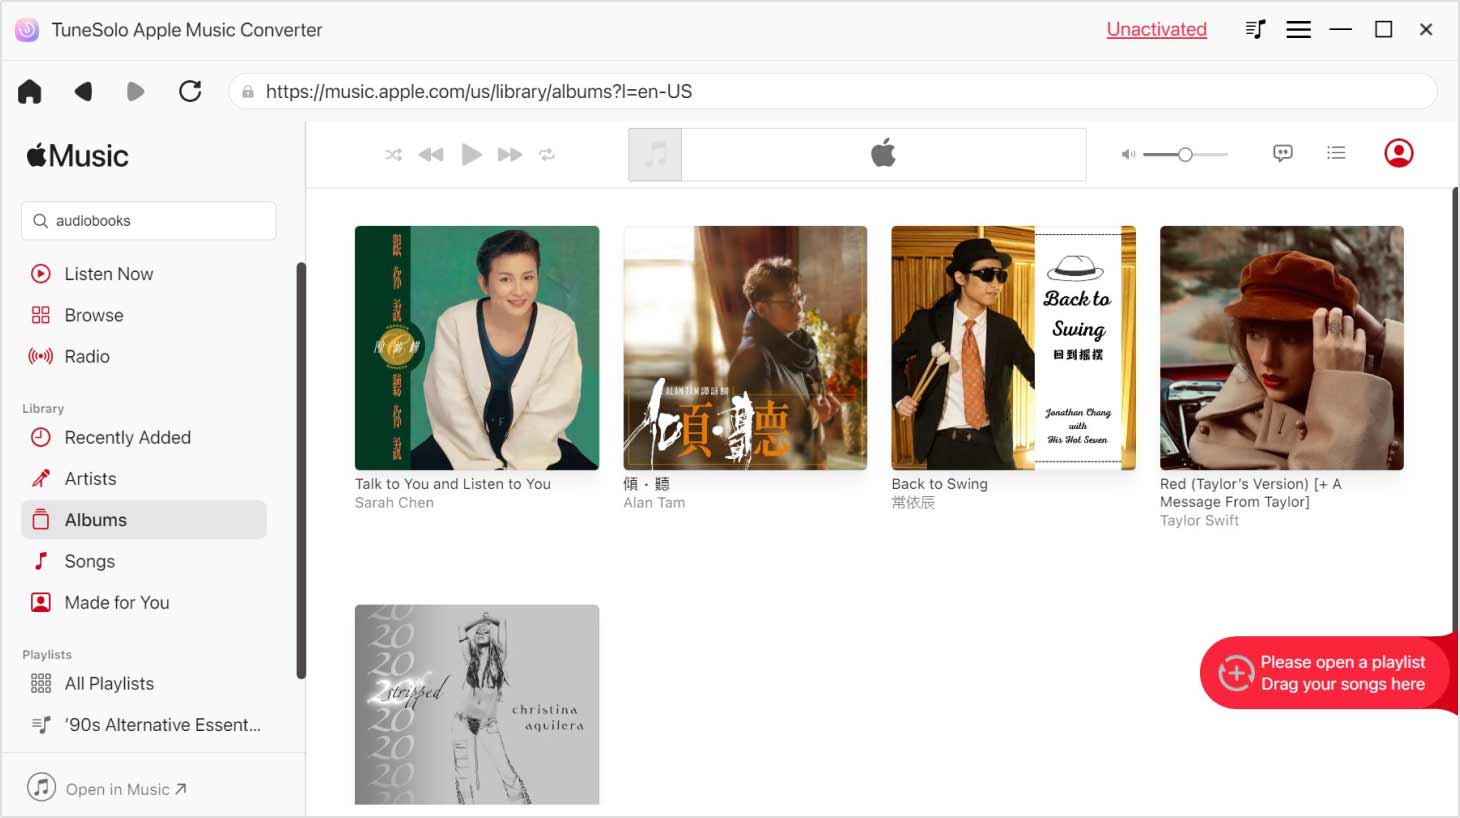 Convert My Apple Music Albums to MP3